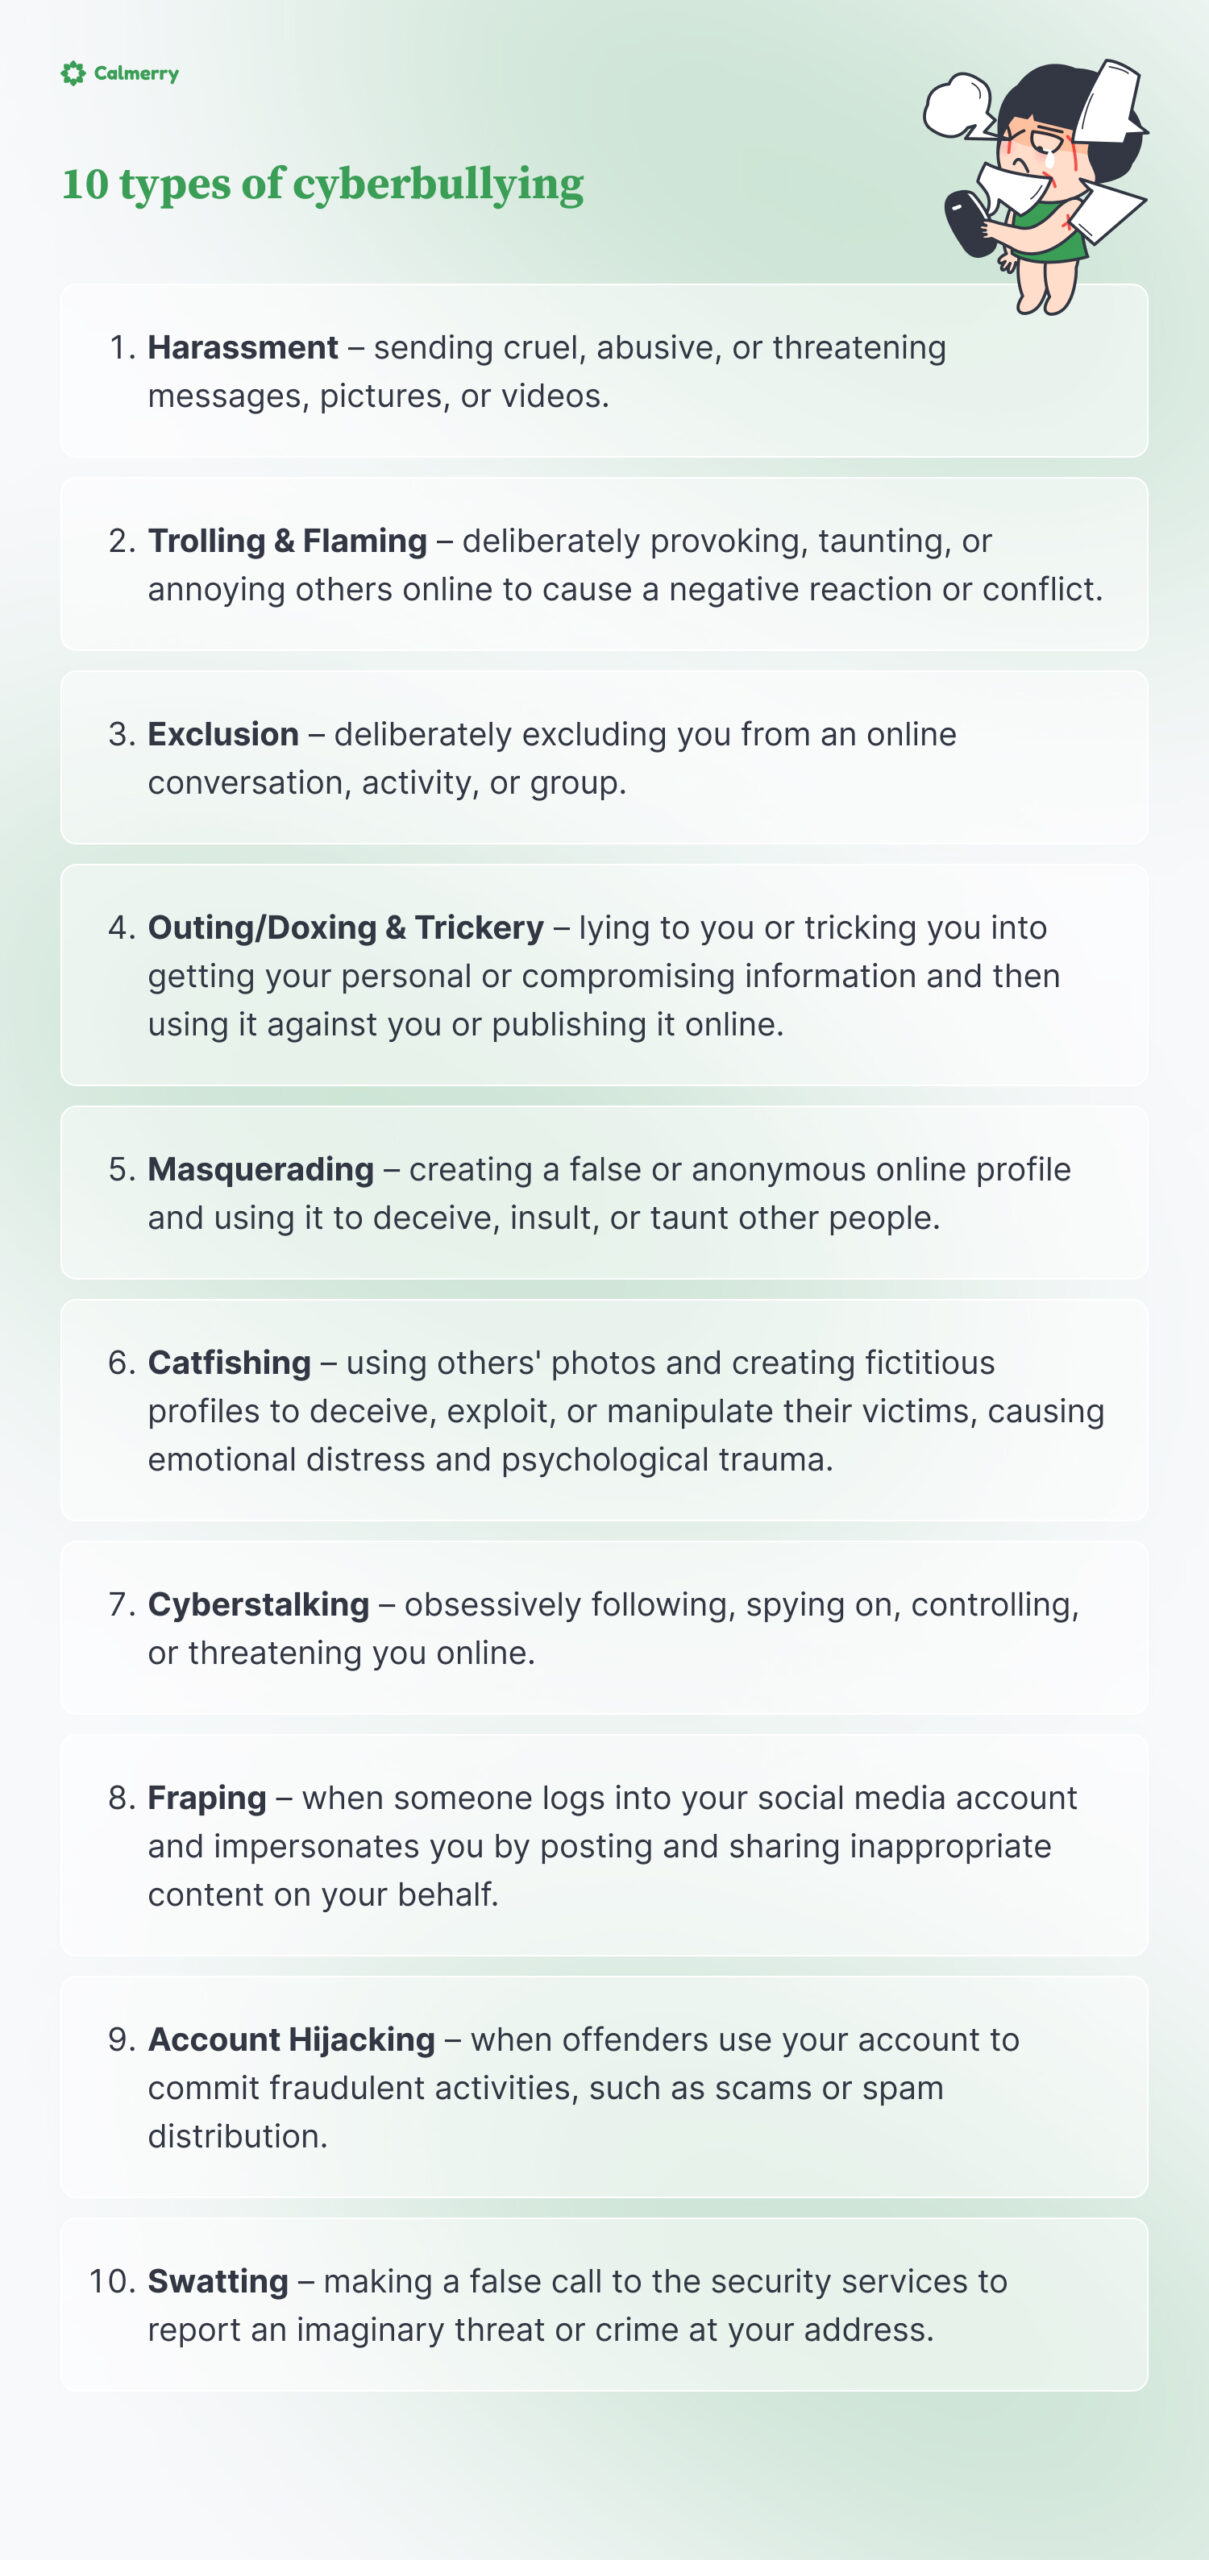 10 types of cyberbullying:
1. Harassment – sending cruel, abusive, or threatening messages, pictures, or videos. 
2. Trolling & Flaming – deliberately provoking, taunting, or annoying others online to cause a negative reaction or conflict. 
3. Exclusion – deliberately excluding you from an online conversation, activity, or group. 
4. Outing/Doxing & Trickery – lying to you or tricking you into getting your personal or compromising information and then using it against you or publishing it online. 
5. Masquerading – creating a false or anonymous online profile and using it to deceive, insult, or taunt other people. 
6. Catfishing – using others' photos and creating fictitious profiles to deceive, exploit, or manipulate their victims, causing emotional distress and psychological trauma.
7. Cyberstalking – obsessively following, spying on, controlling, or threatening you online.
8. Fraping – when someone logs into your social media account and impersonates you by posting and sharing inappropriate content on your behalf. 
9. Account Hijacking – when offenders use your account to commit fraudulent activities, such as scams or spam distribution.
10. Swatting – making a false call to the security services to report an imaginary threat or crime at your address.